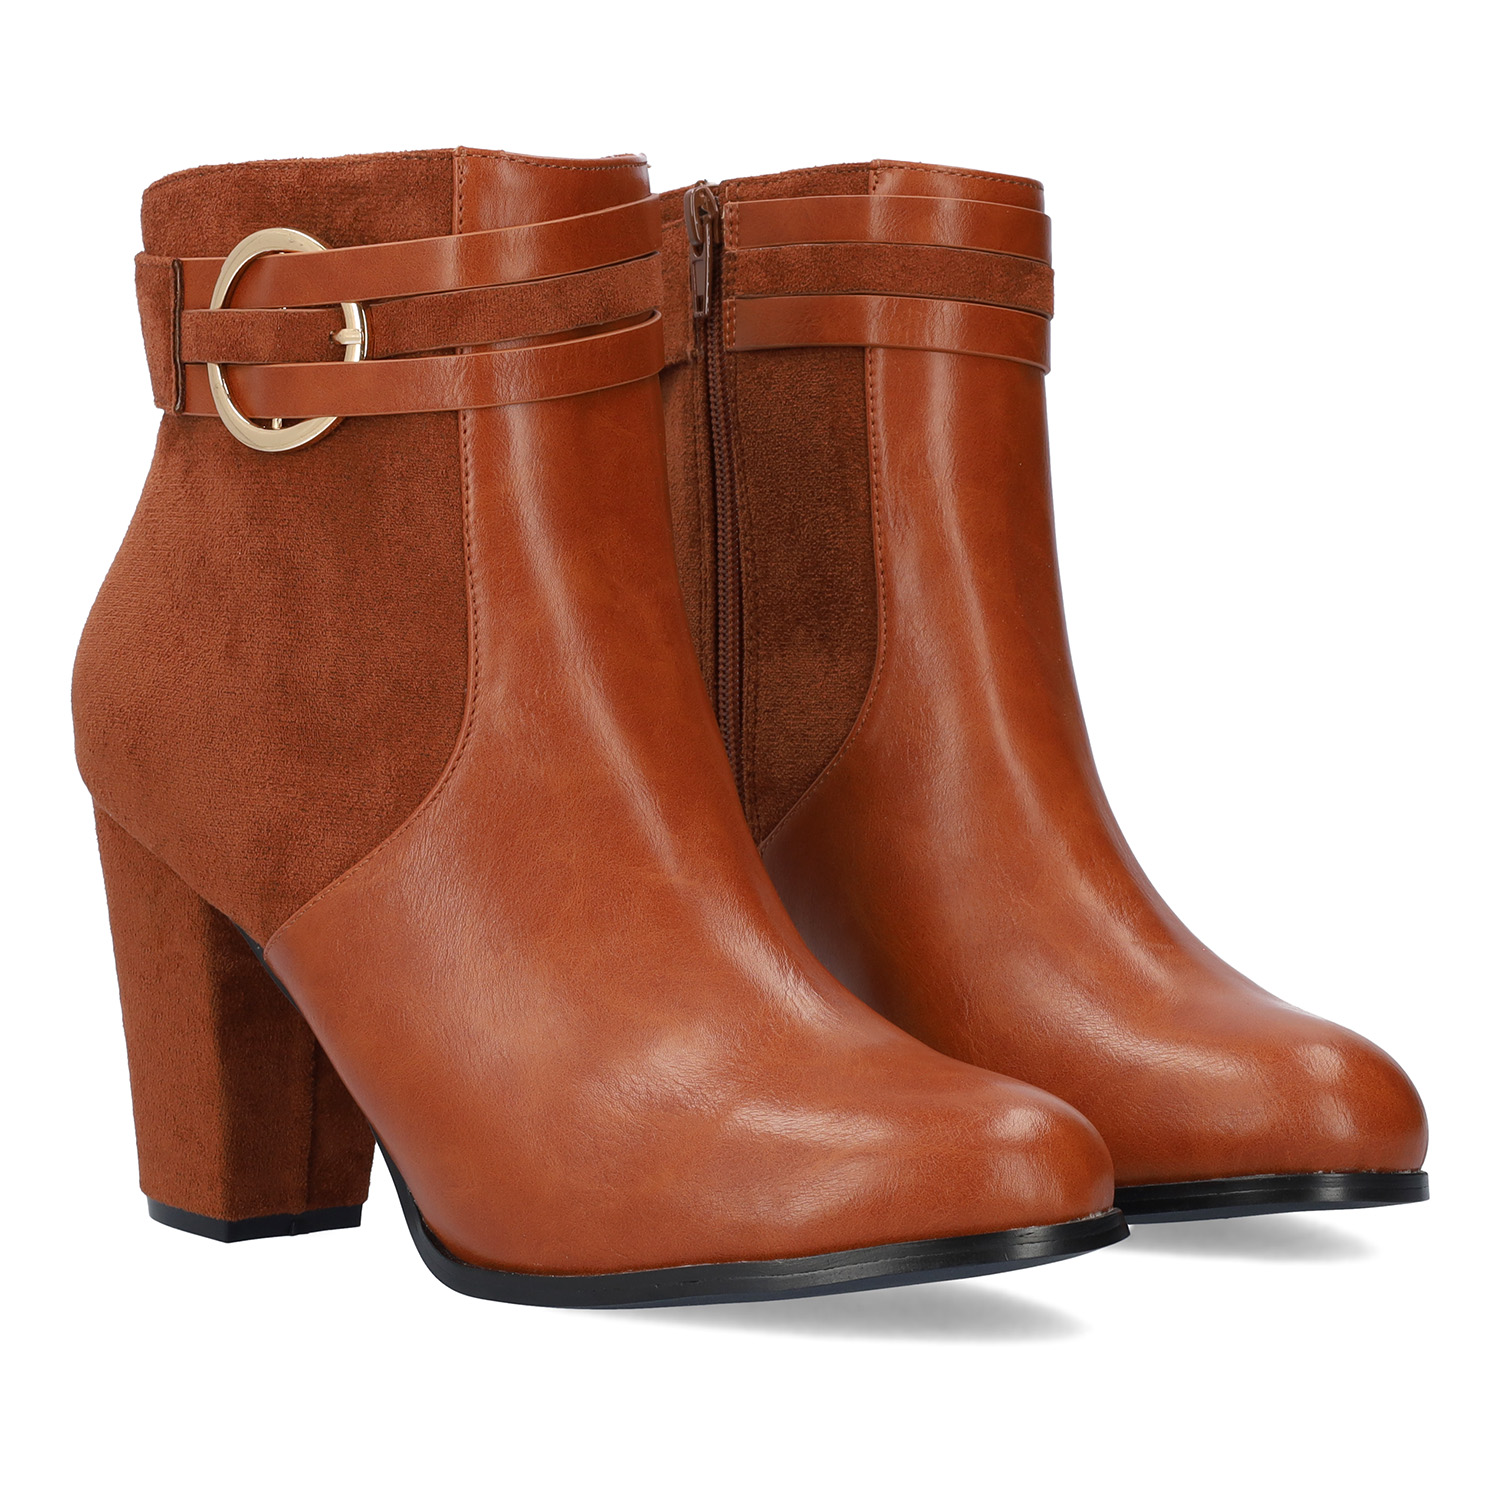 High heeled combined brown colour bootie.